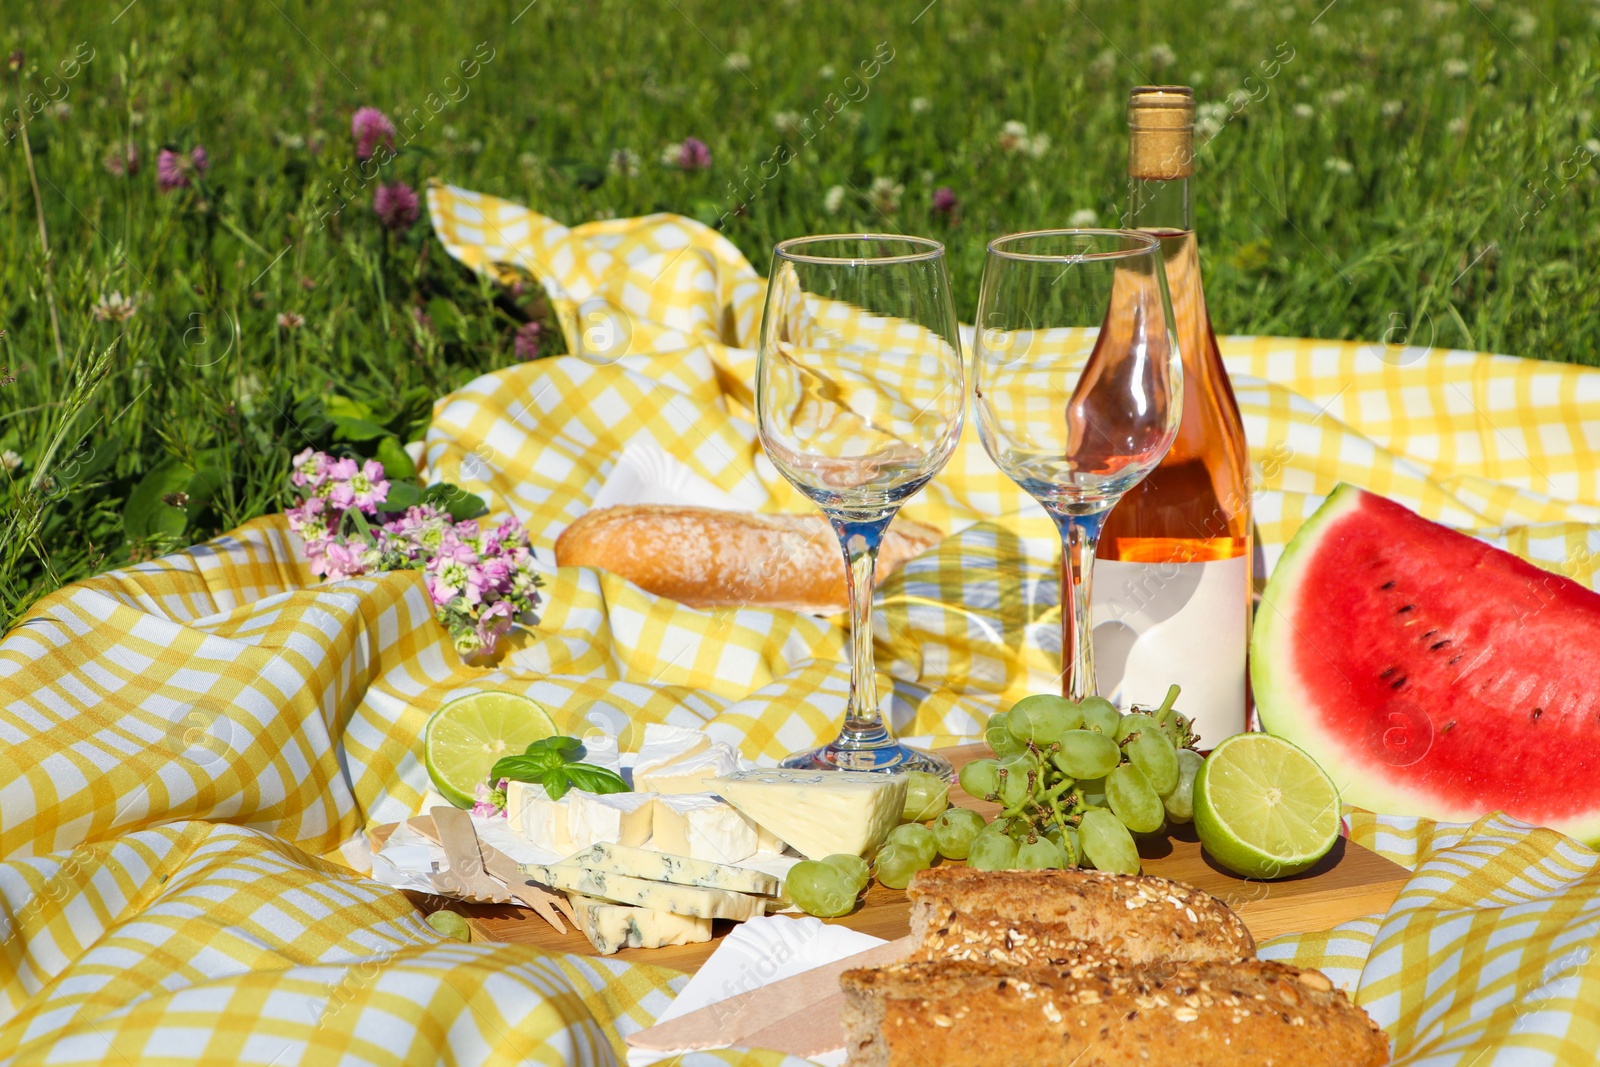 Photo of Picnic blanket with delicious food and wine on green grass outdoors